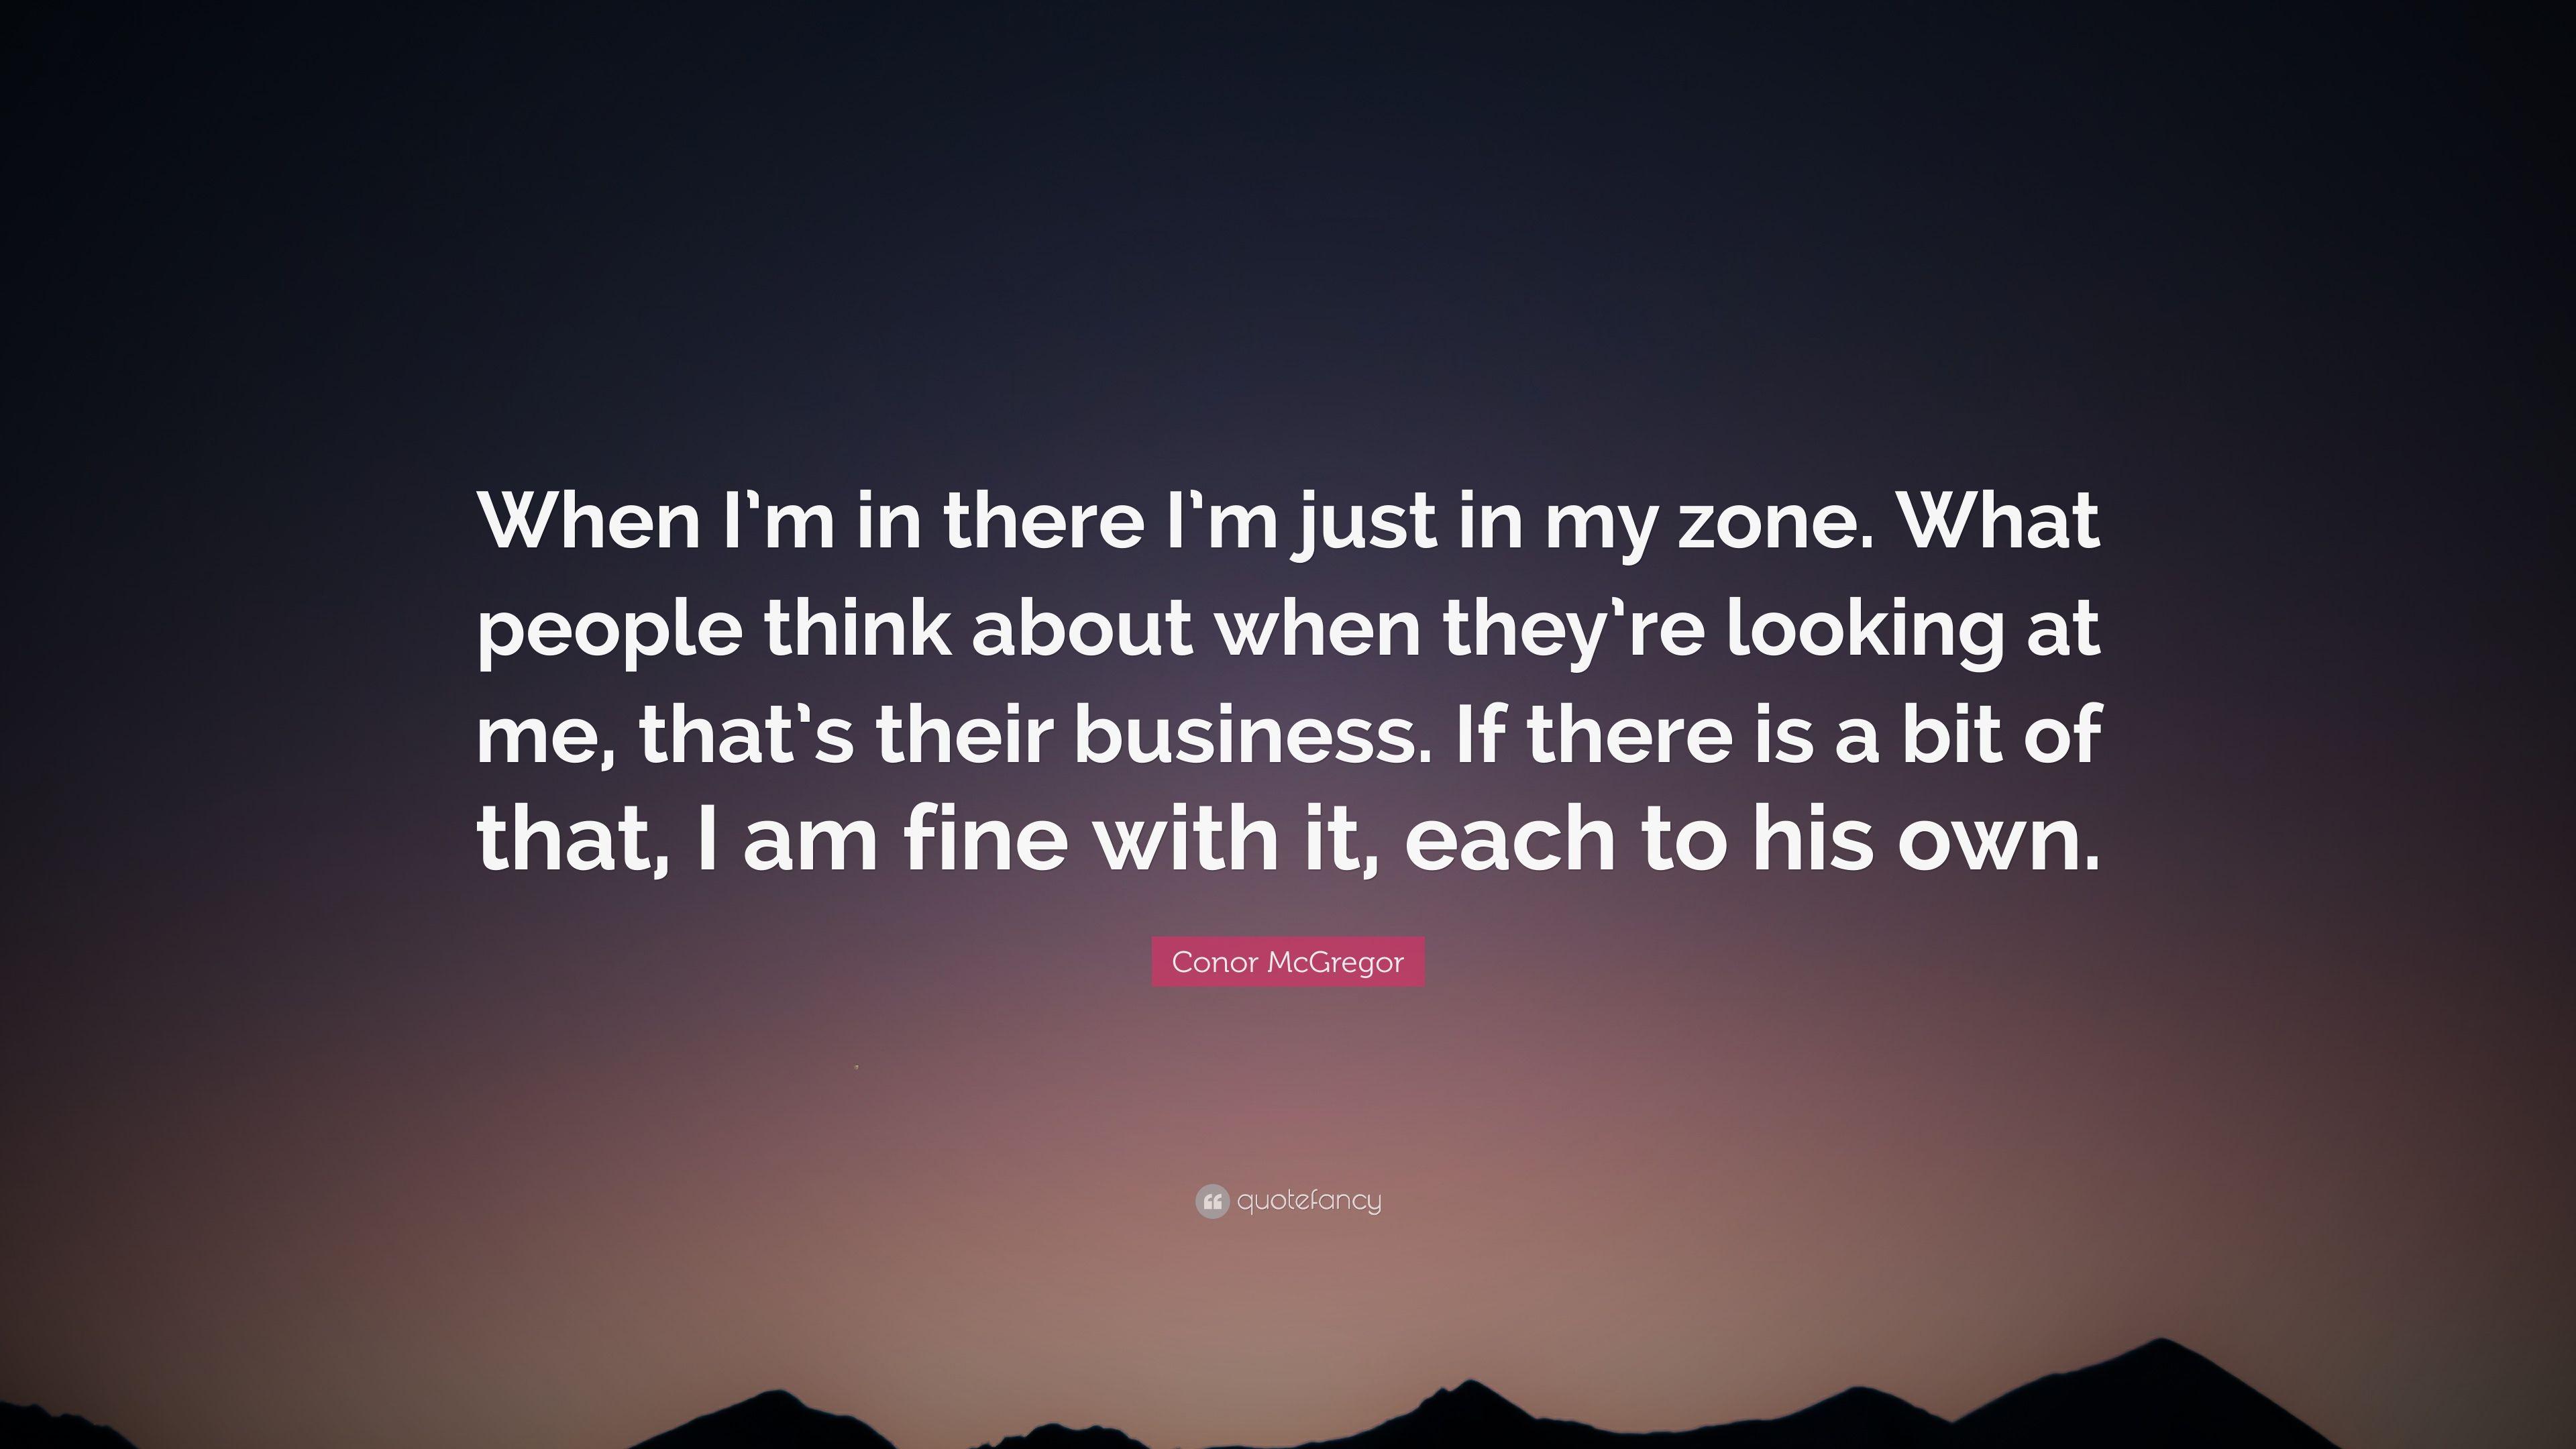 Conor McGregor Quote: “When I'm in there I'm just in my zone. What